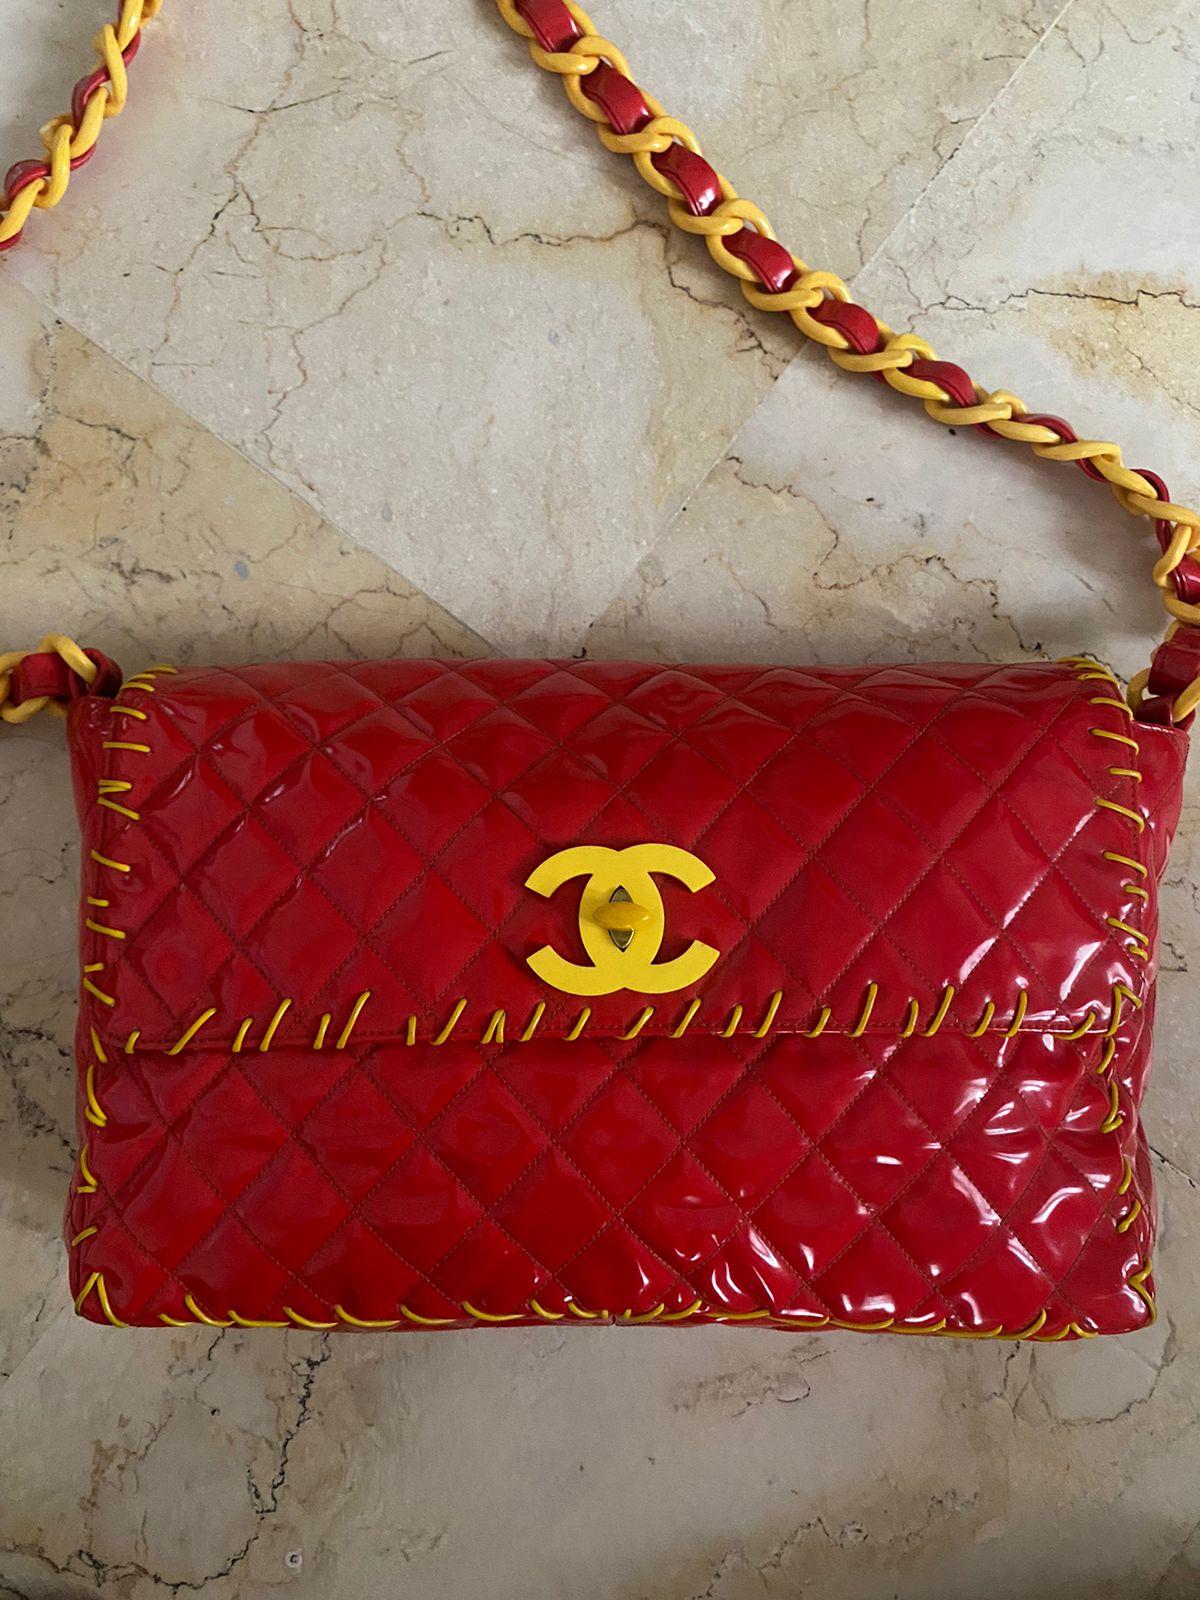 Rare 1990s Chanel Red Vinyl Maxi Whipstitch Flap Bag 12